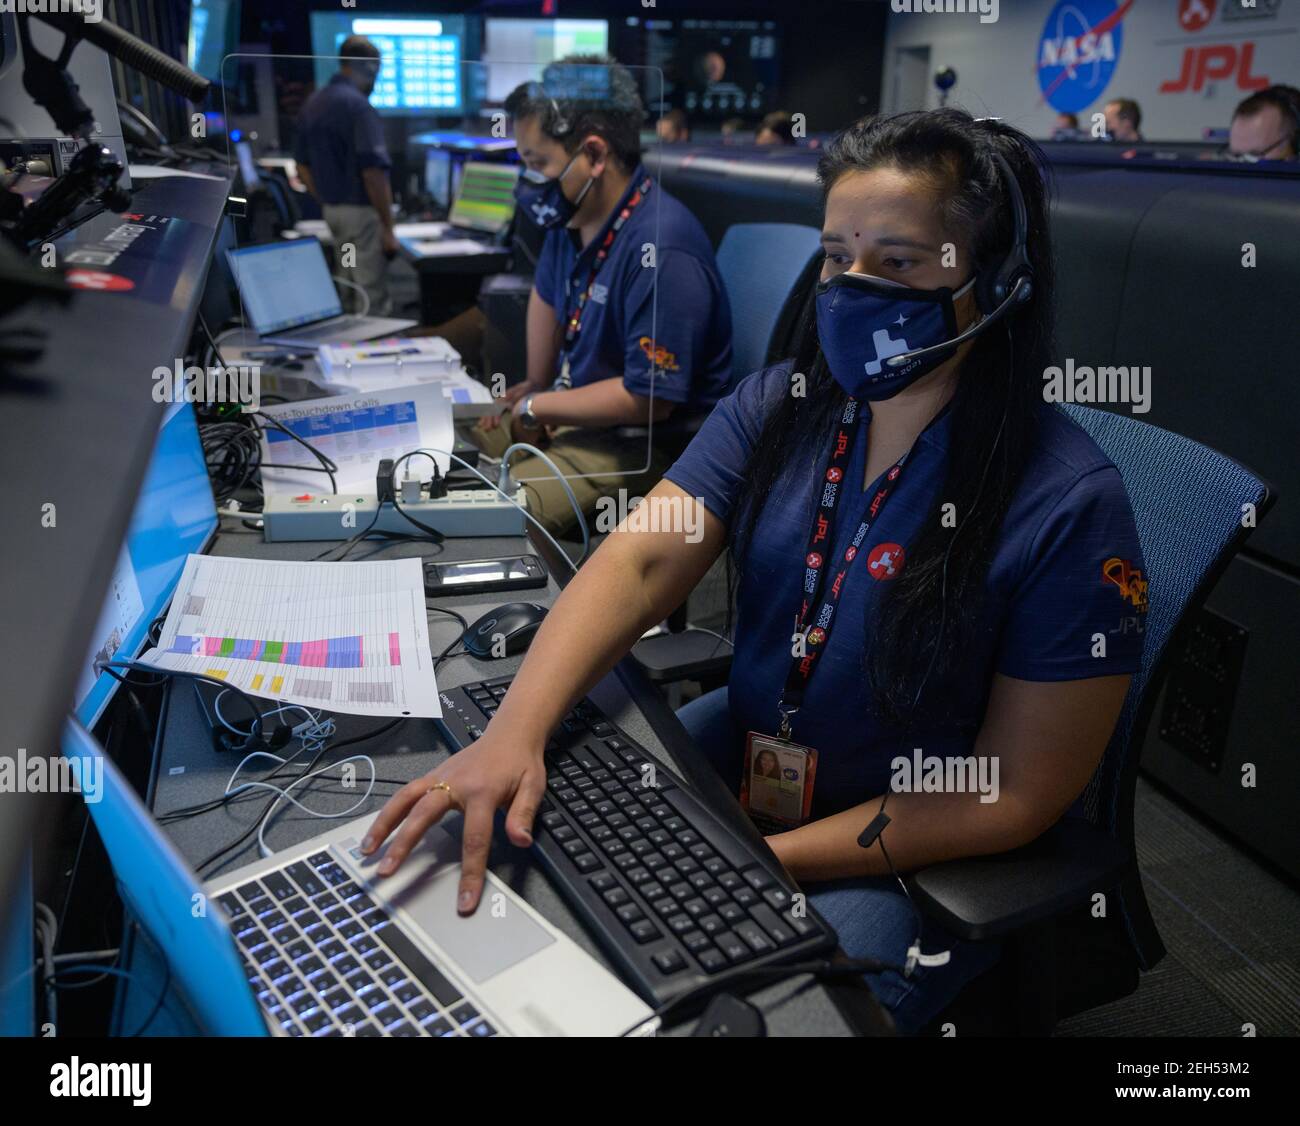 Pasadena, United States Of America. 18th Feb, 2021. NASA Perseverance Mars rover mission commentator and guidance, navigation, and controls operations Lead Swati Mohan, monitors the landing phase of the NASA Perseverance Mars rover in mission control at the NASA Jet Propulsion Laboratory February 18, 2021 in Pasadena, California. The Perseverance Mars rover landed successfully and immediately began sending images from the surface of the Red Planet. Credit: Planetpix/Alamy Live News Stock Photo